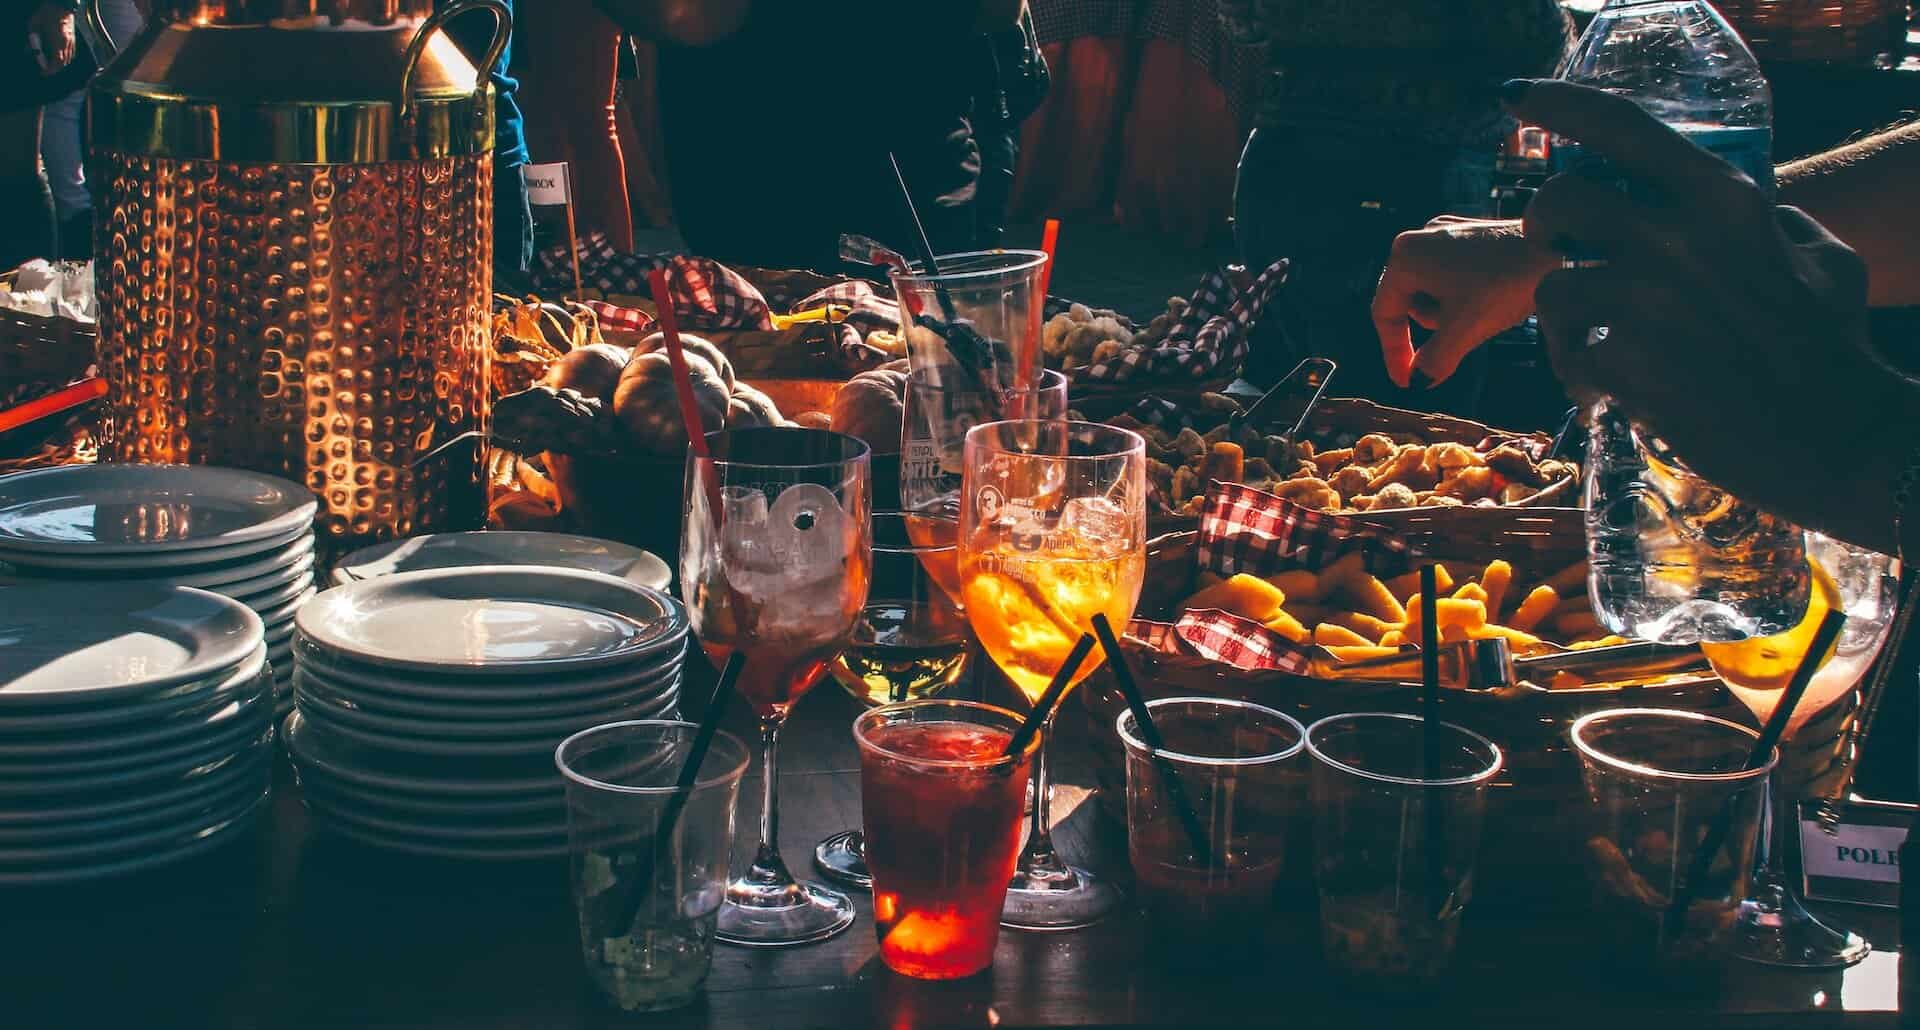 Assorted food and drinks on a table